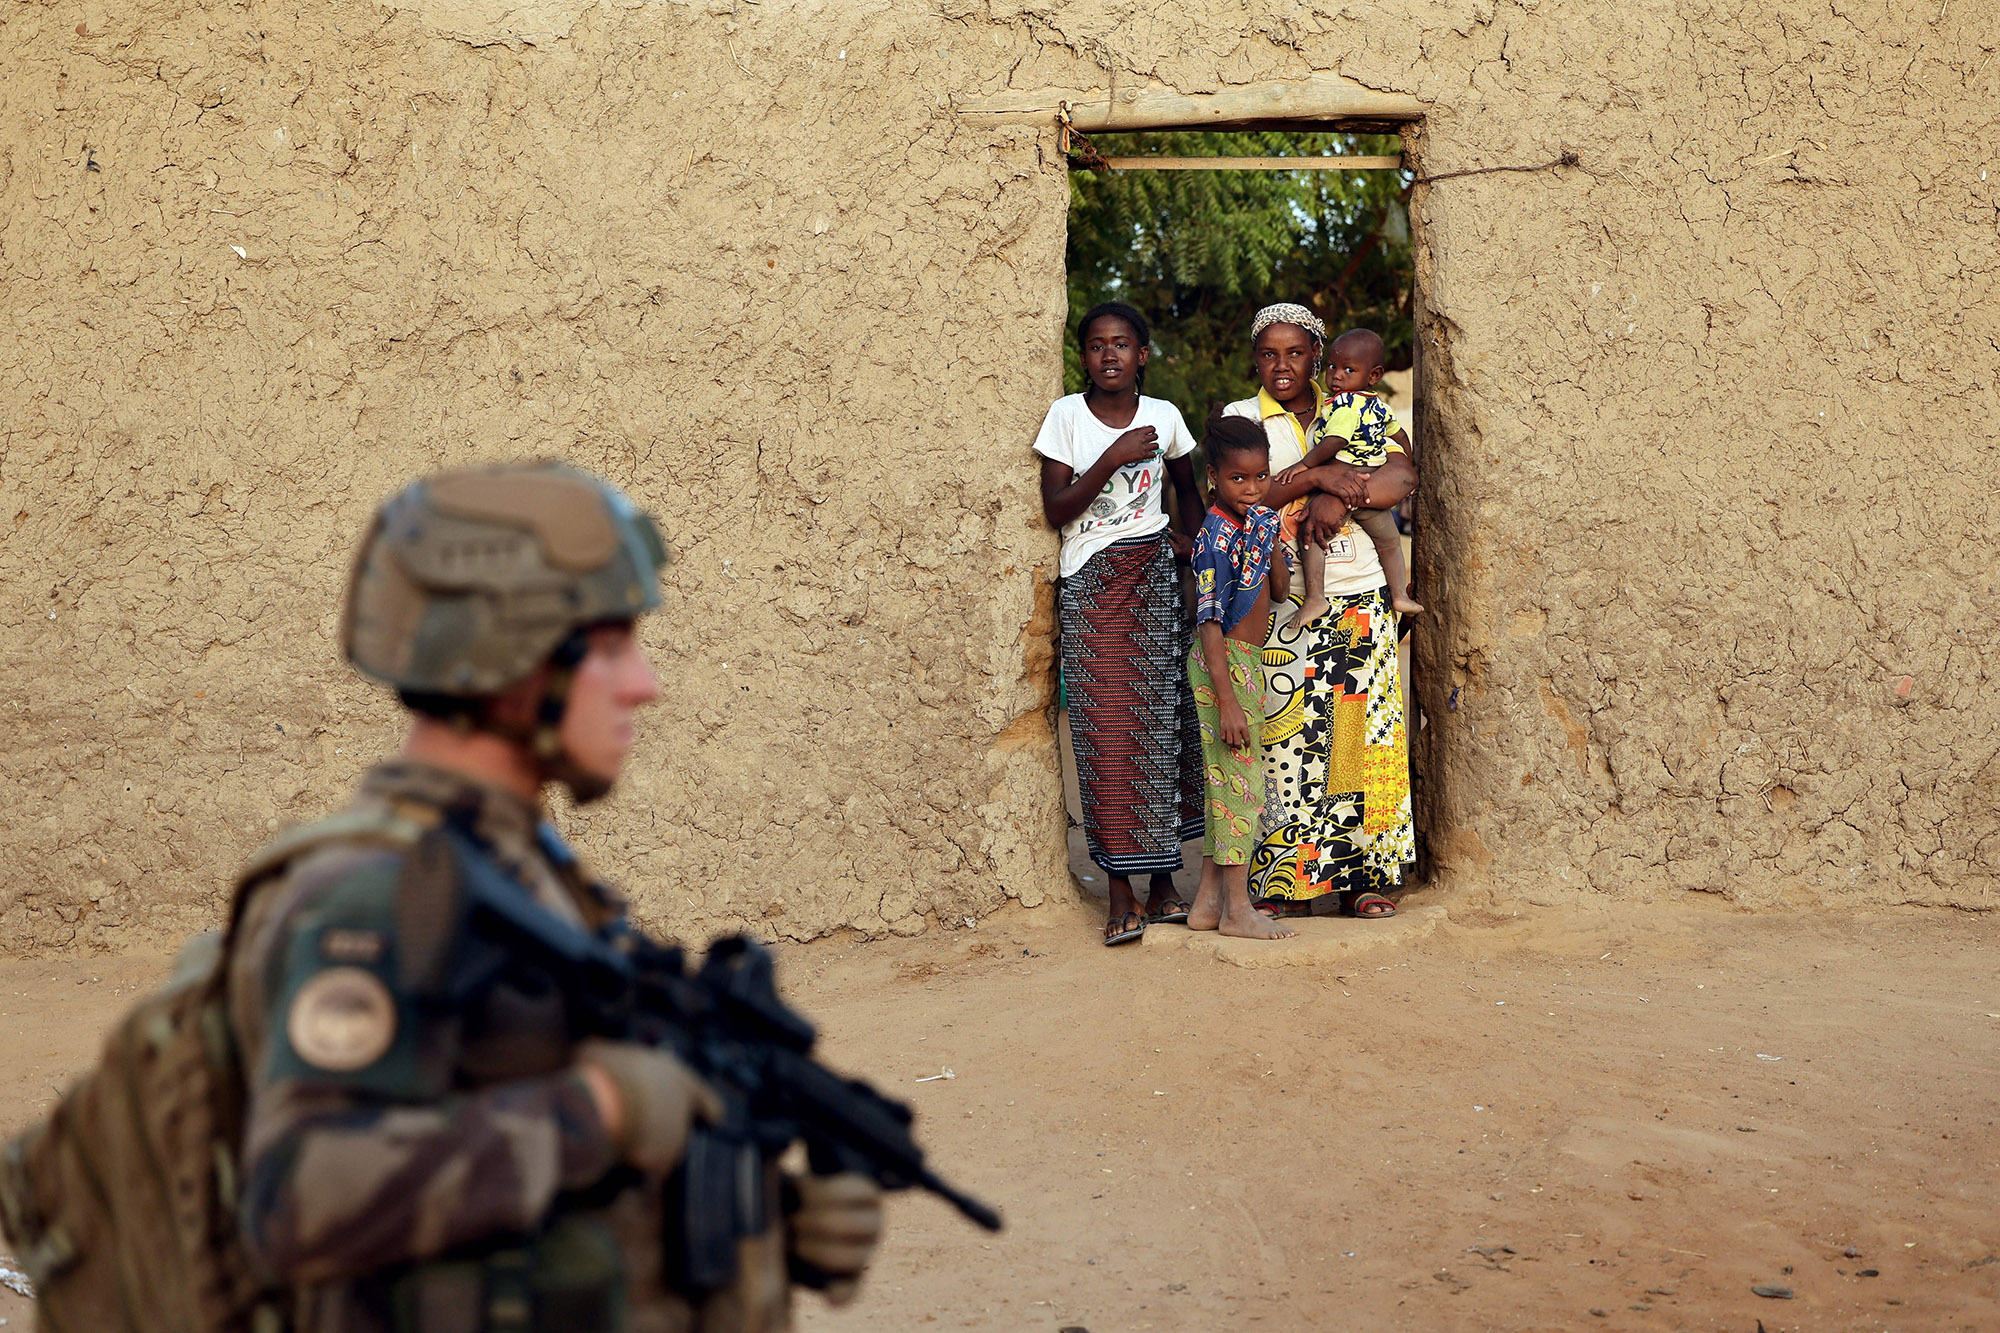 A French soldier patrols the streets of Gao, Mali.&nbsp;